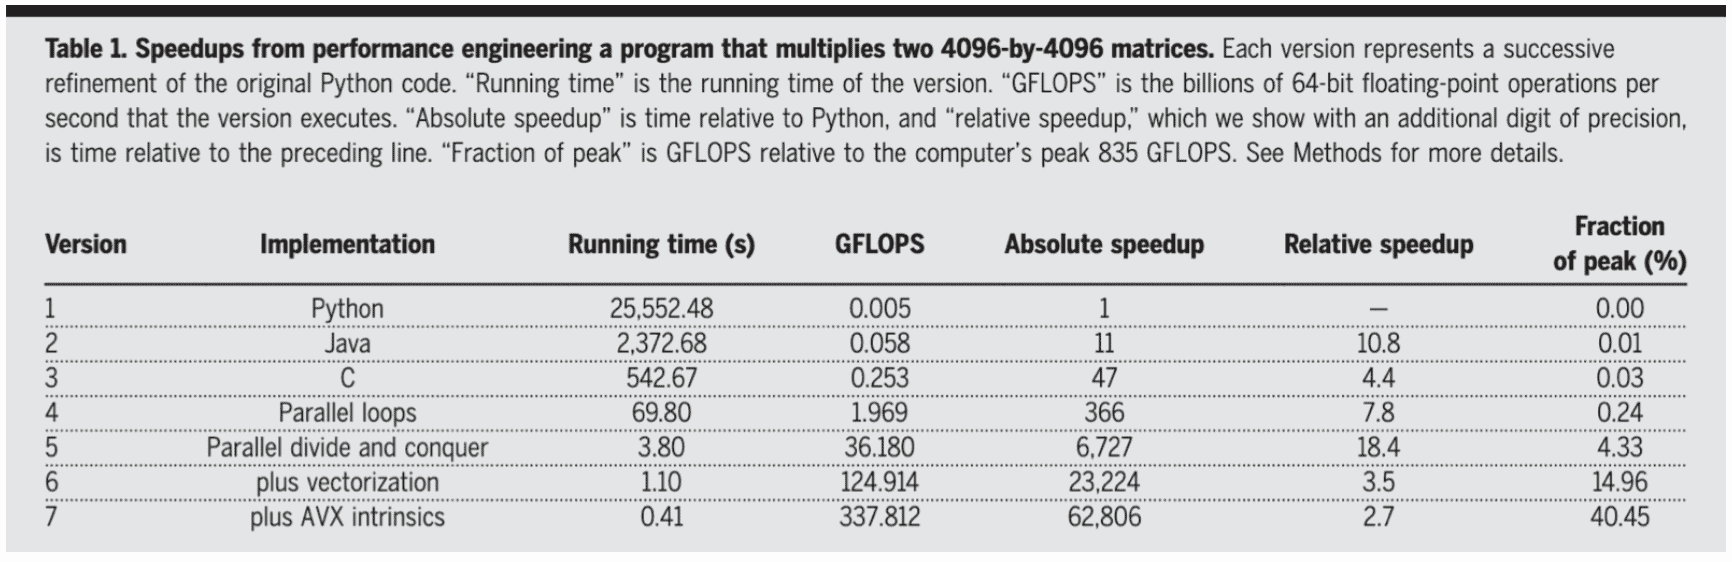 Speedups from performance engineering a program that multiplies two 4096-by-4096 matrices